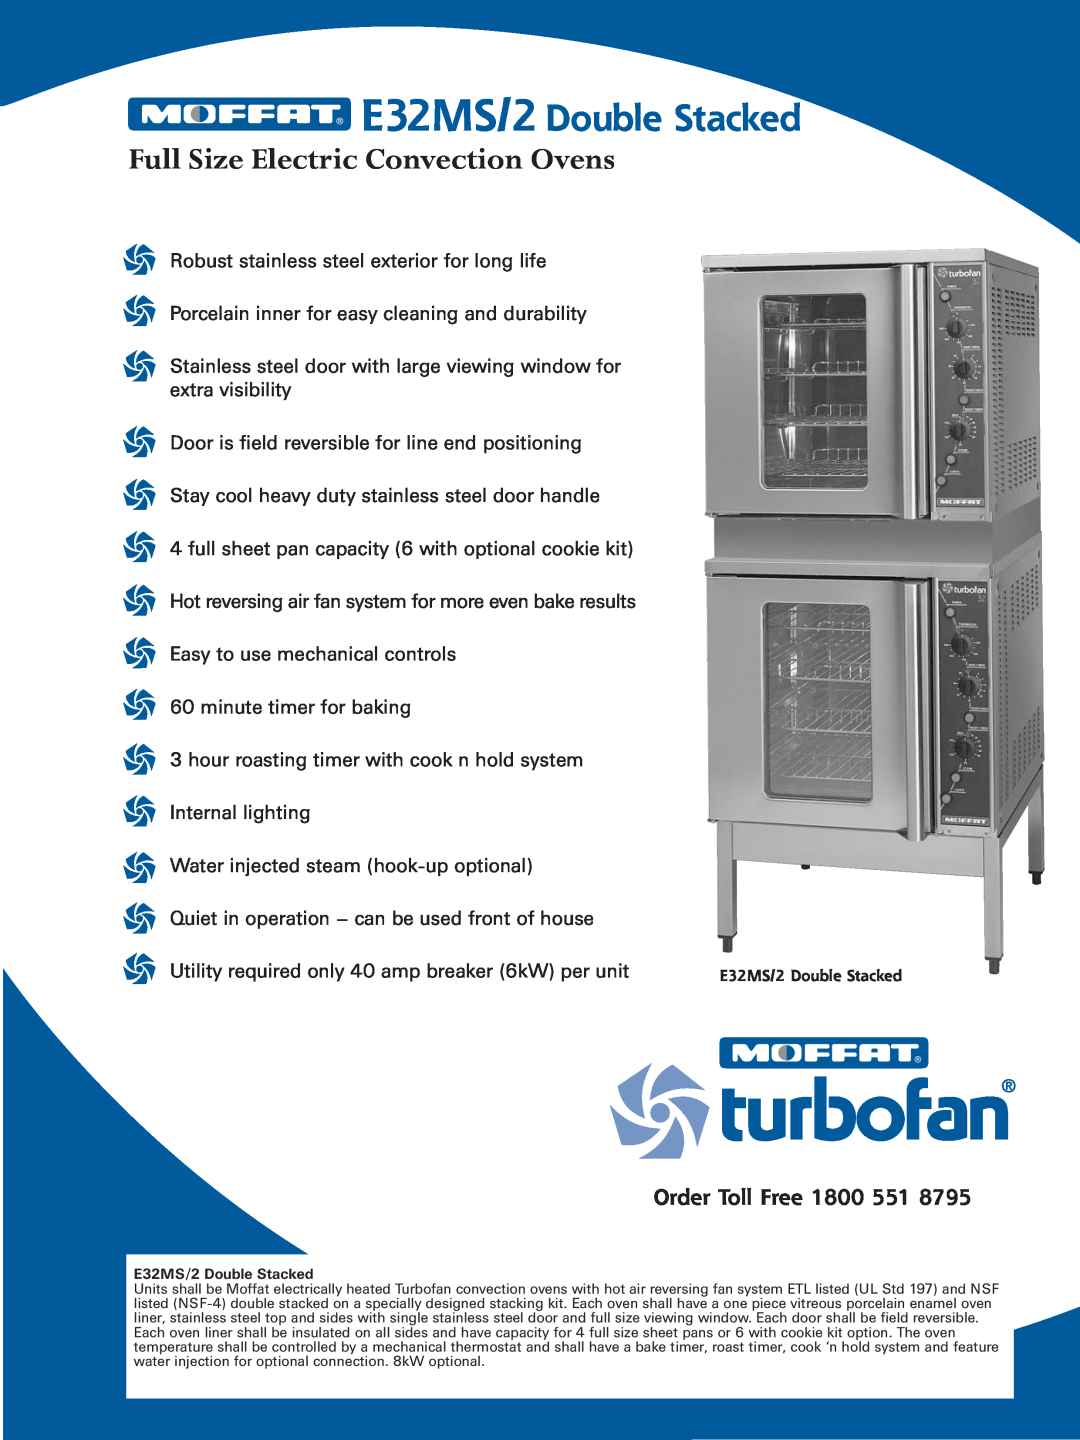 Moffat manual E32MS/2 Double Stacked, Full Size Electric Convection Ovens, Order Toll Free 